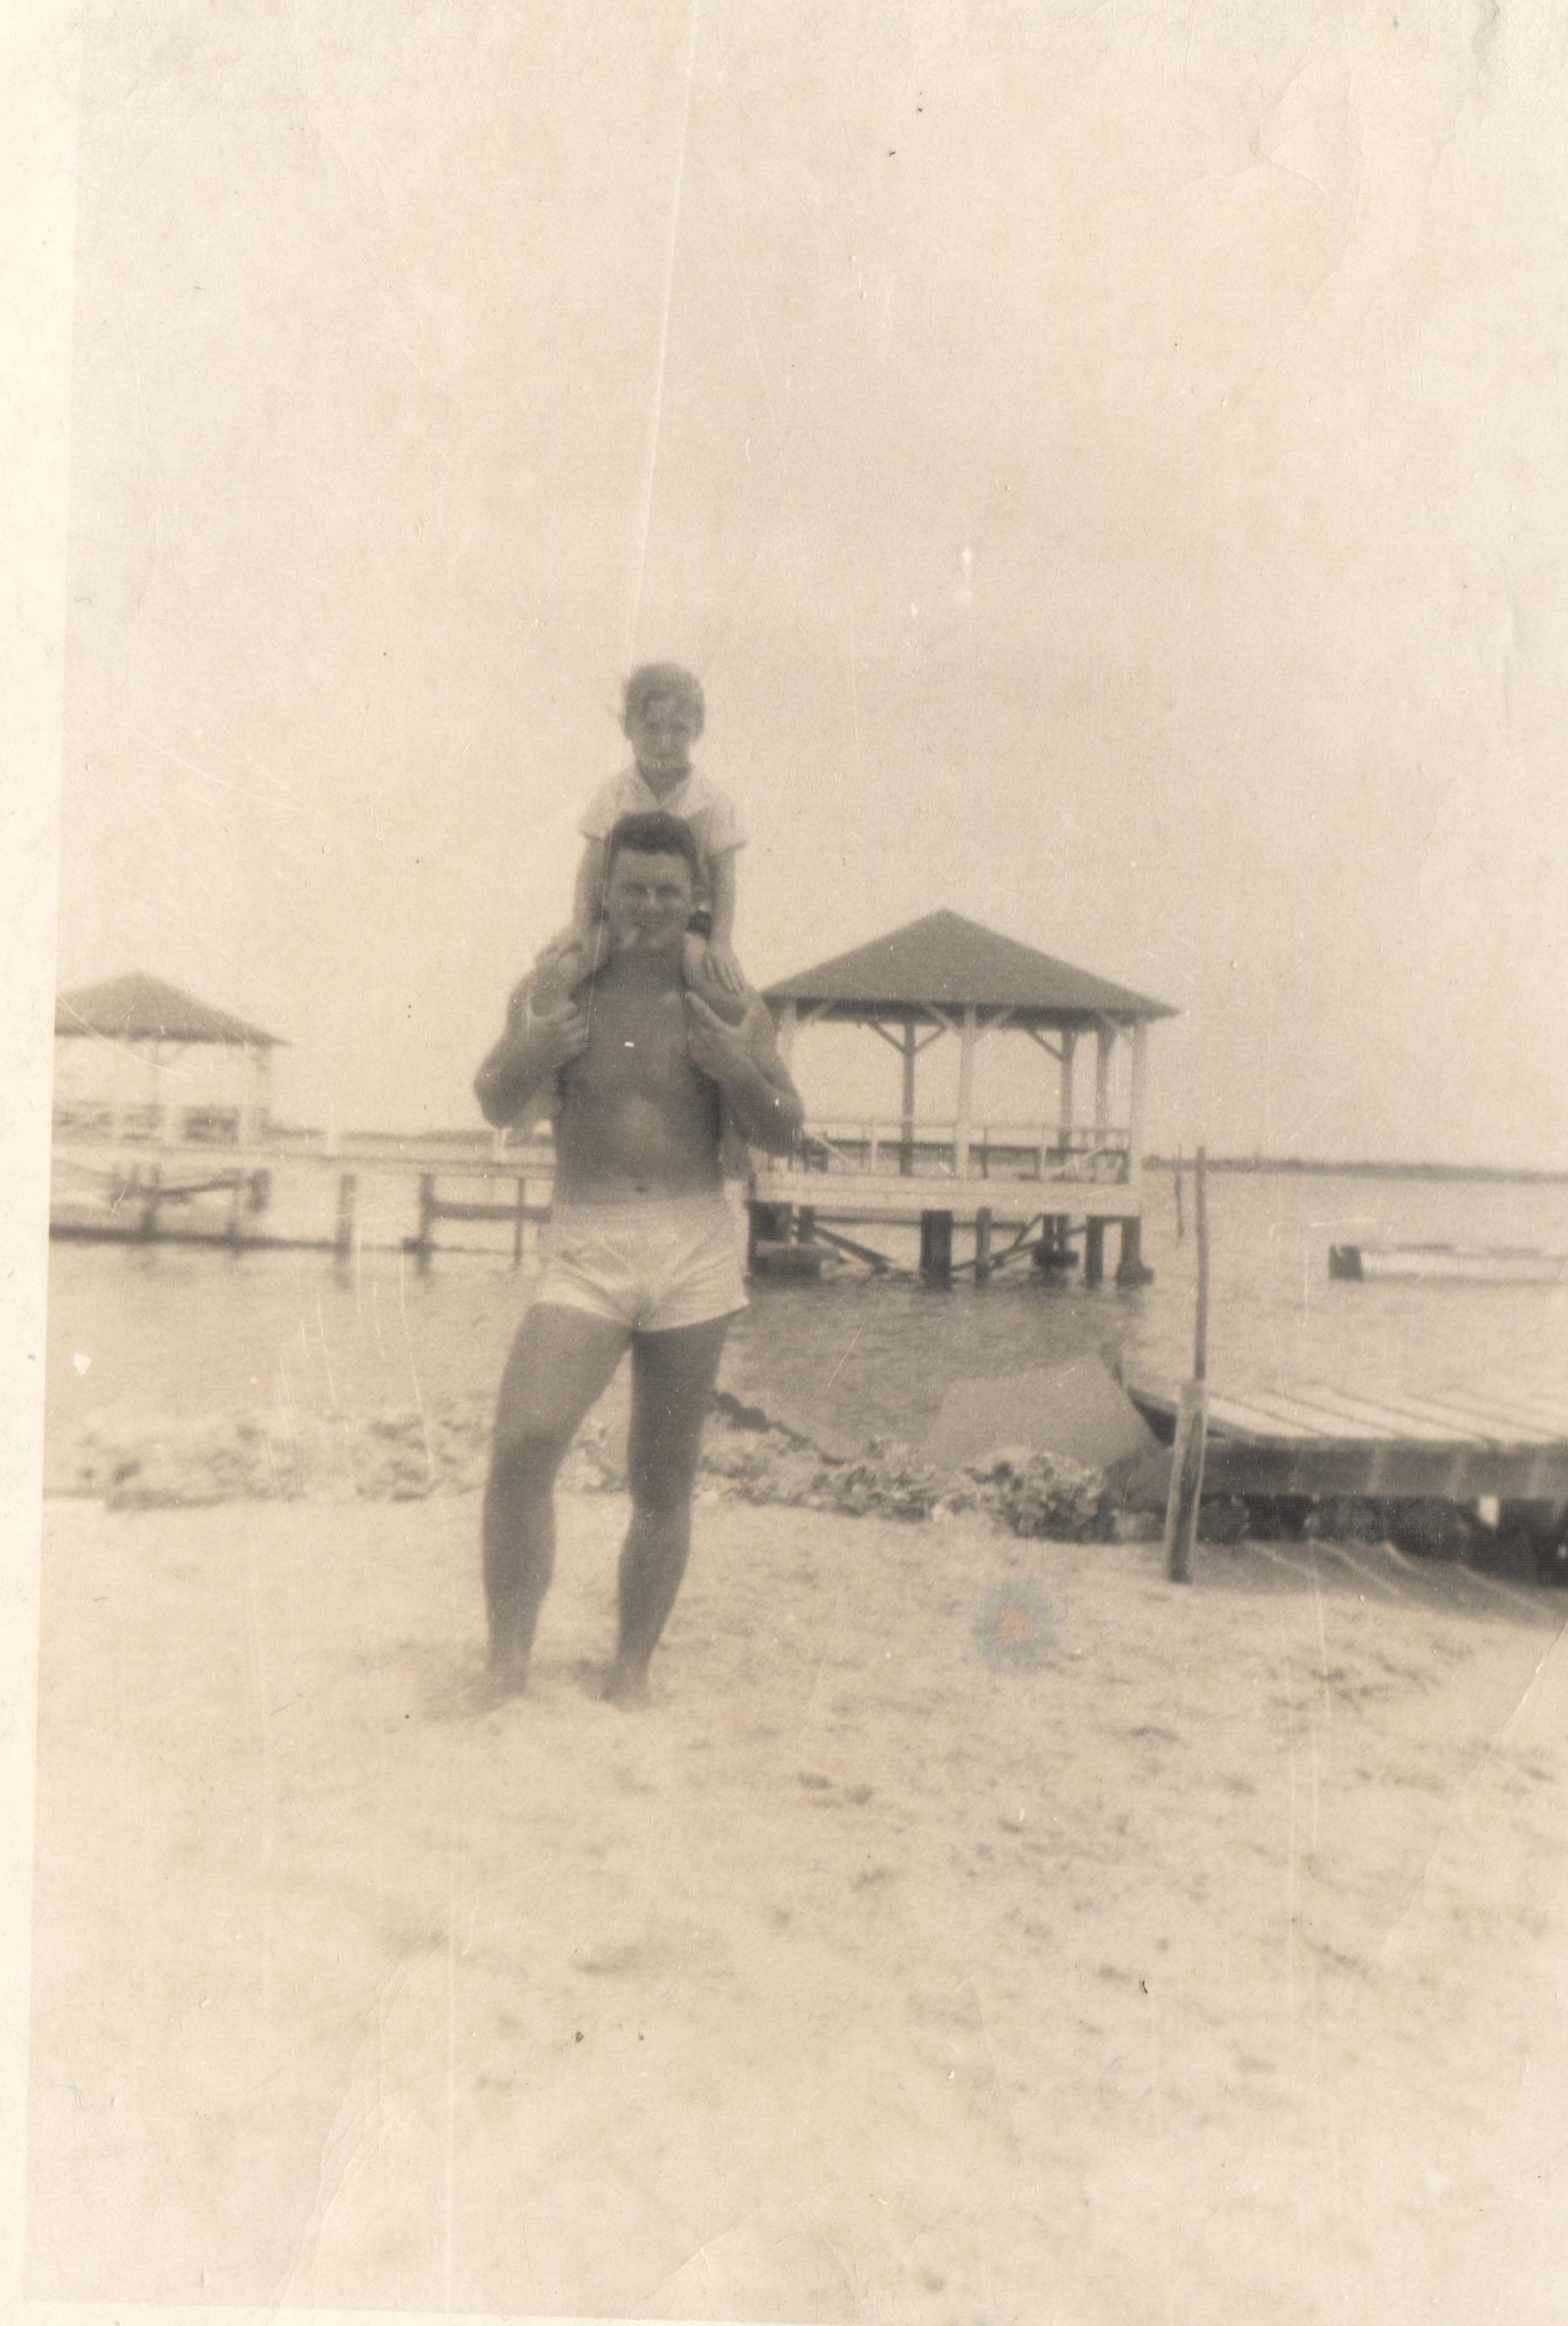 Bill May and unk child.  Boathouse in background was for the Edwards house, which now belongs to Mason Williams